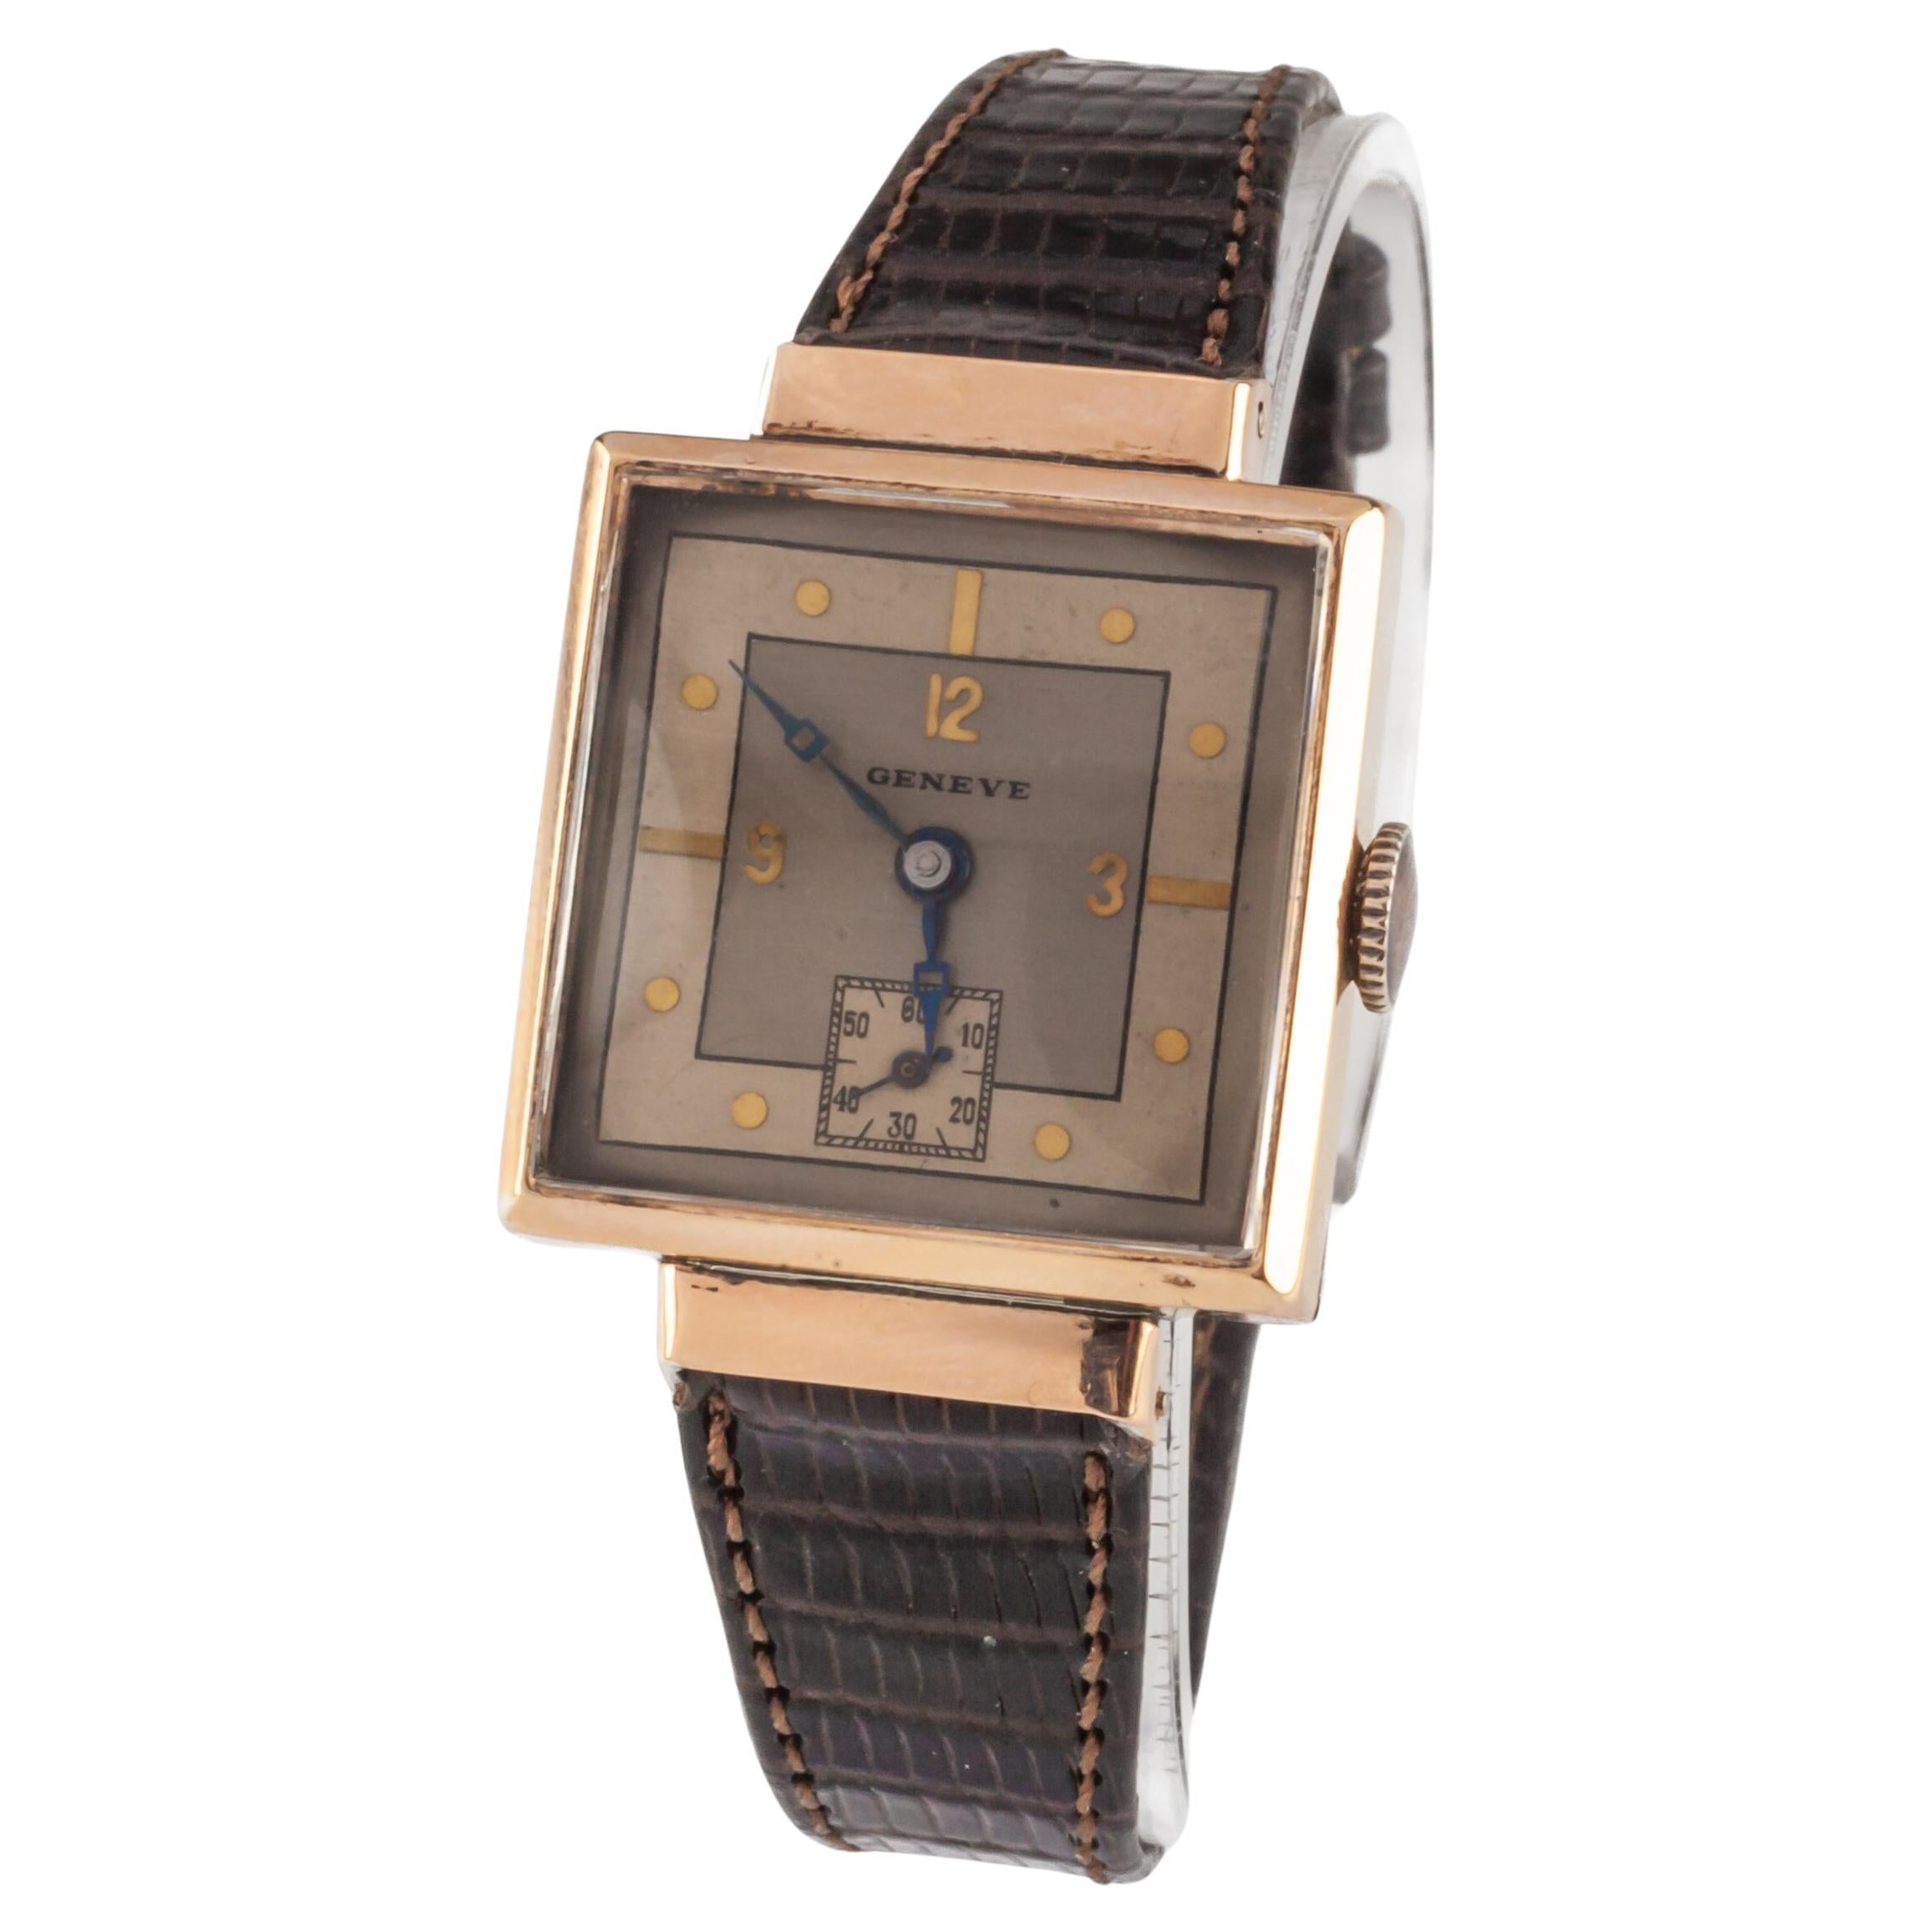 Geneve Men's Art Deco Rose Gold Filled Hand-Winding Watch w/ Leather Band For Sale